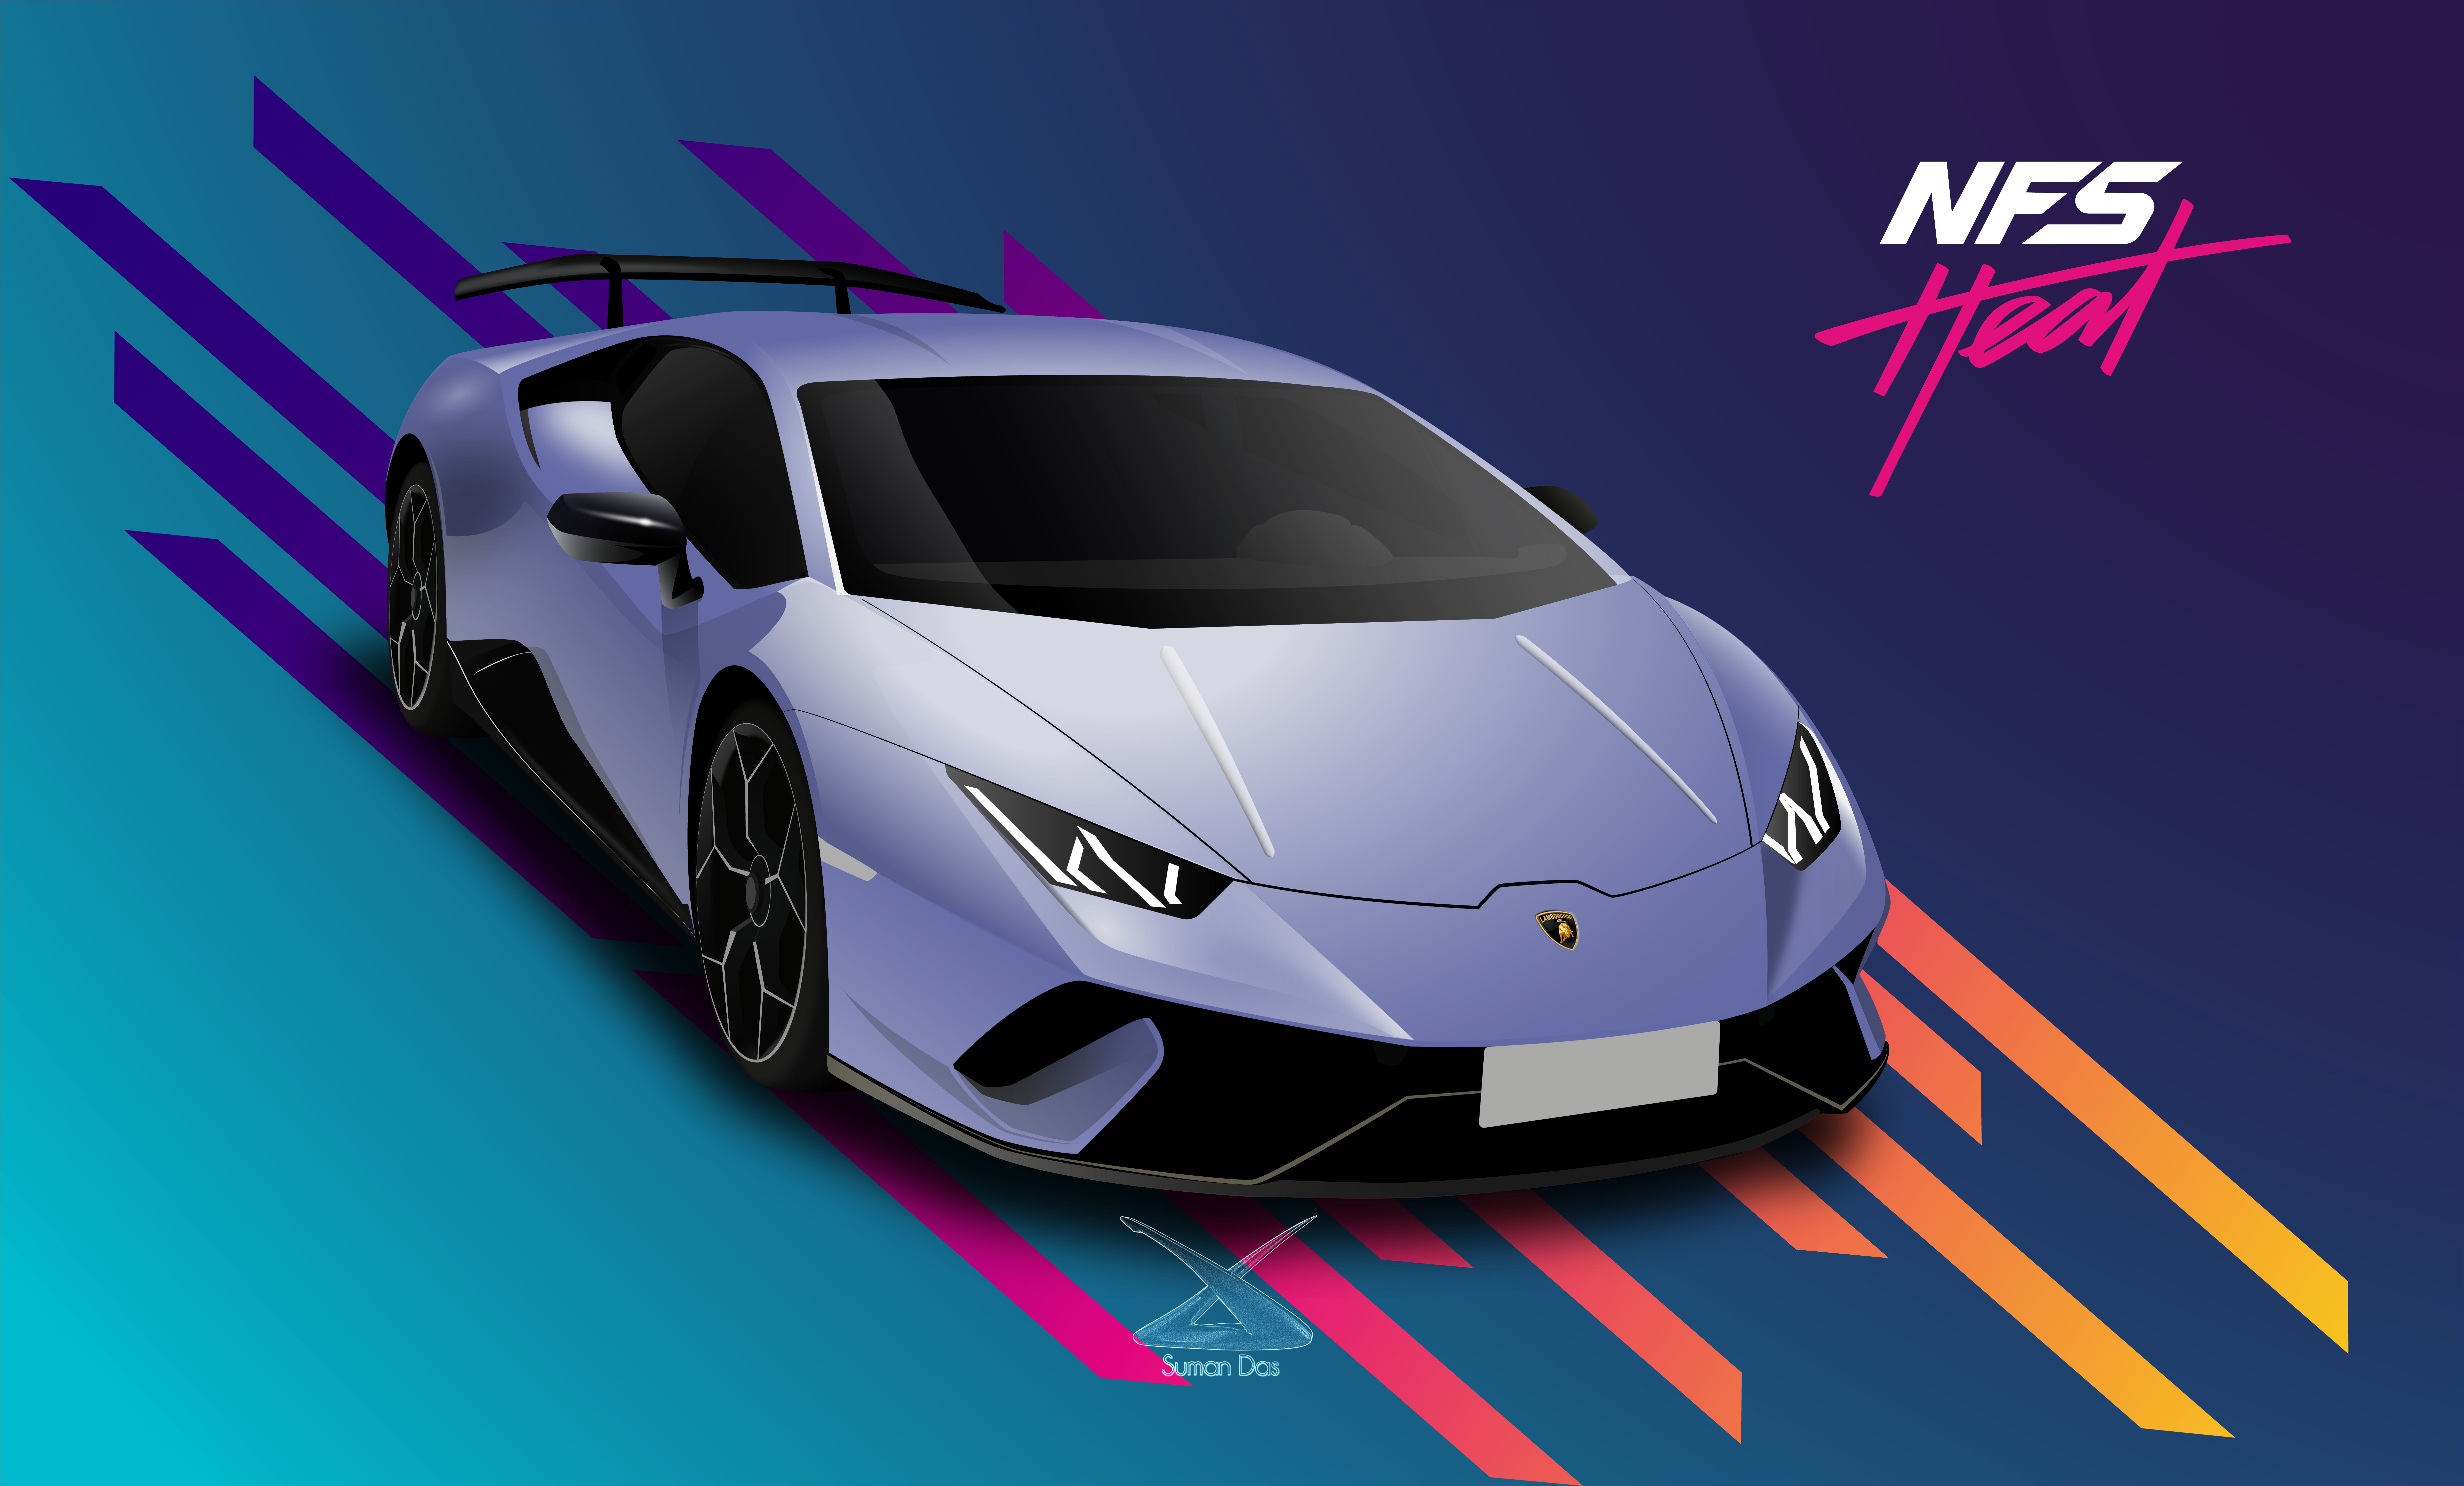 lamborghini huracan performante, need for speed, video game, need for speed heat